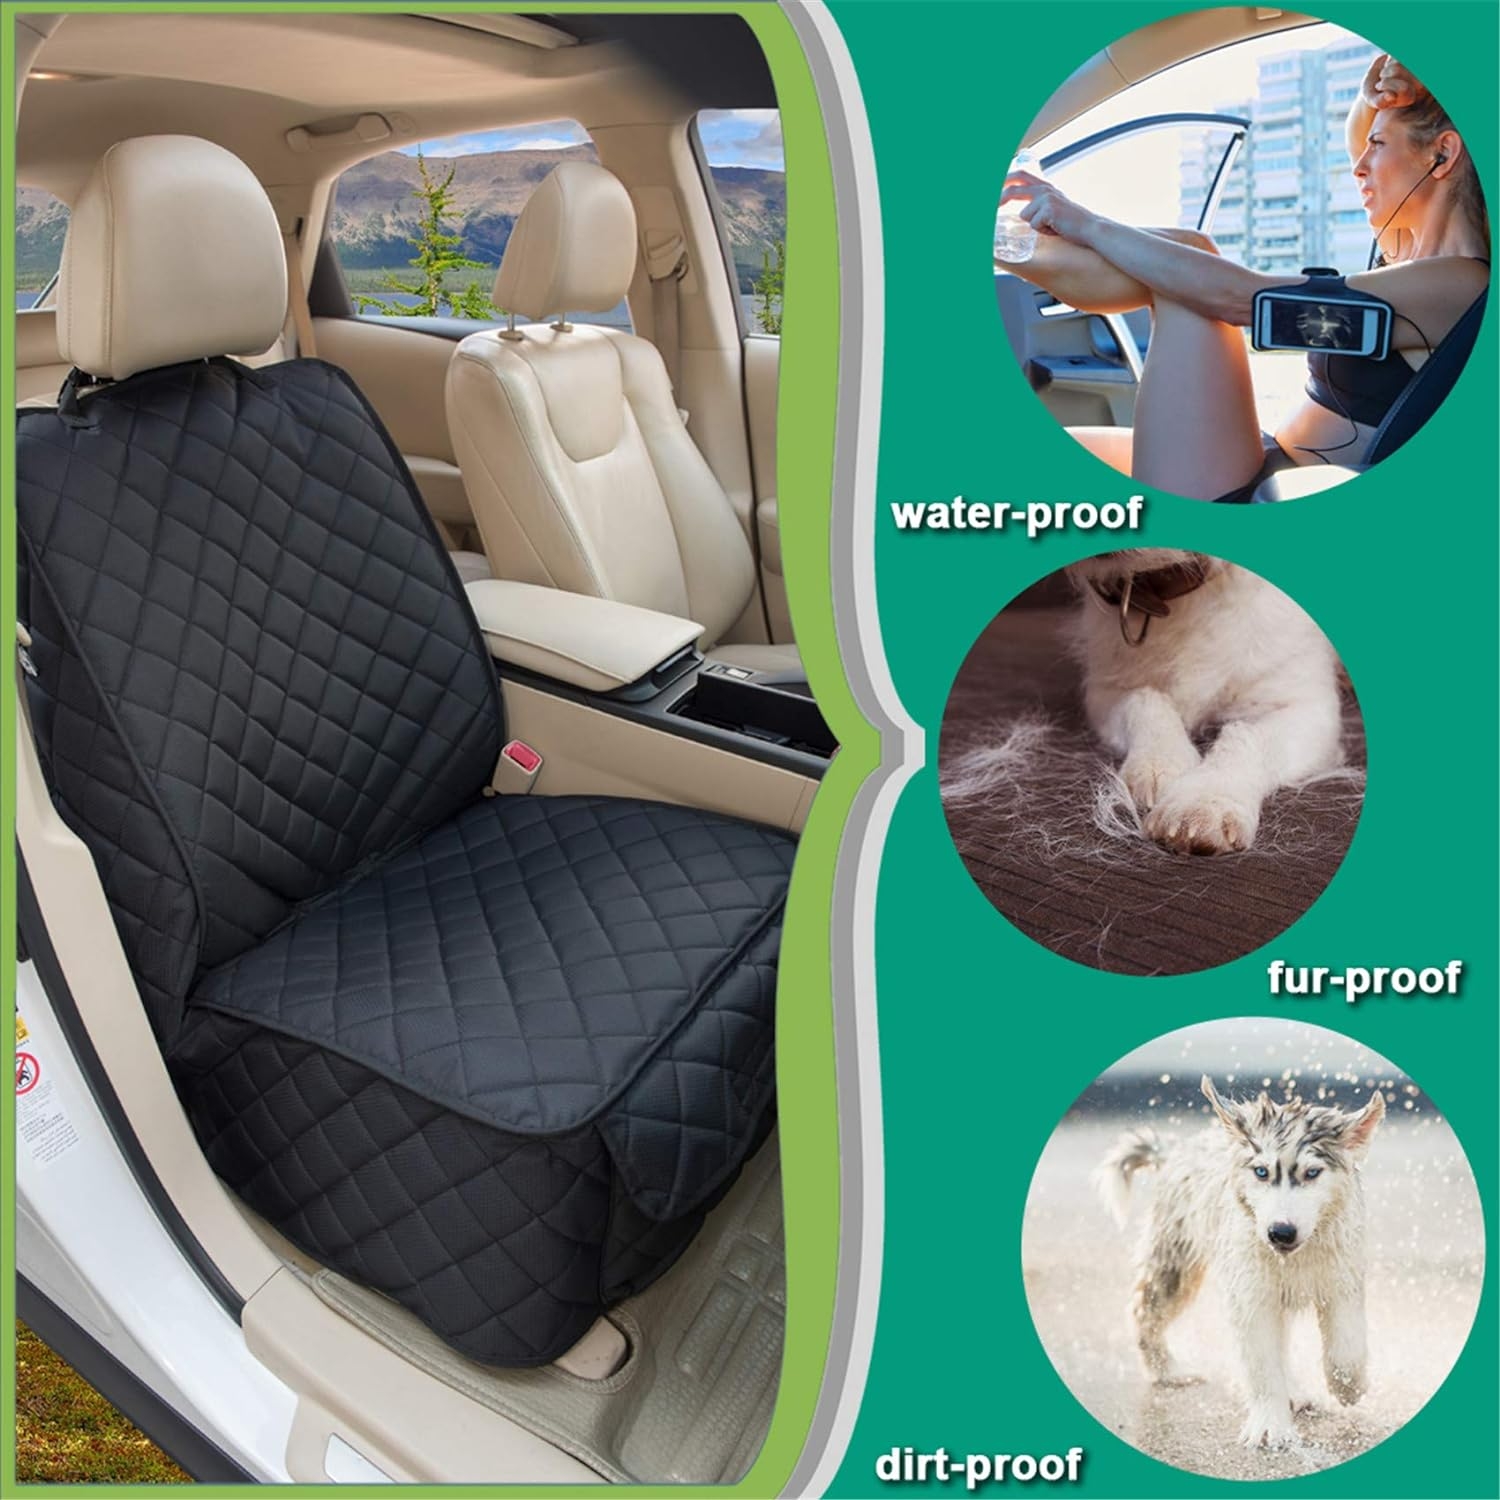 HAPYFOST Waterproof Front Seat Cover Dog Car Seat Covers Nonslip and Full Protection with Side Flaps Fits Most Cars, Trucks, SUVs